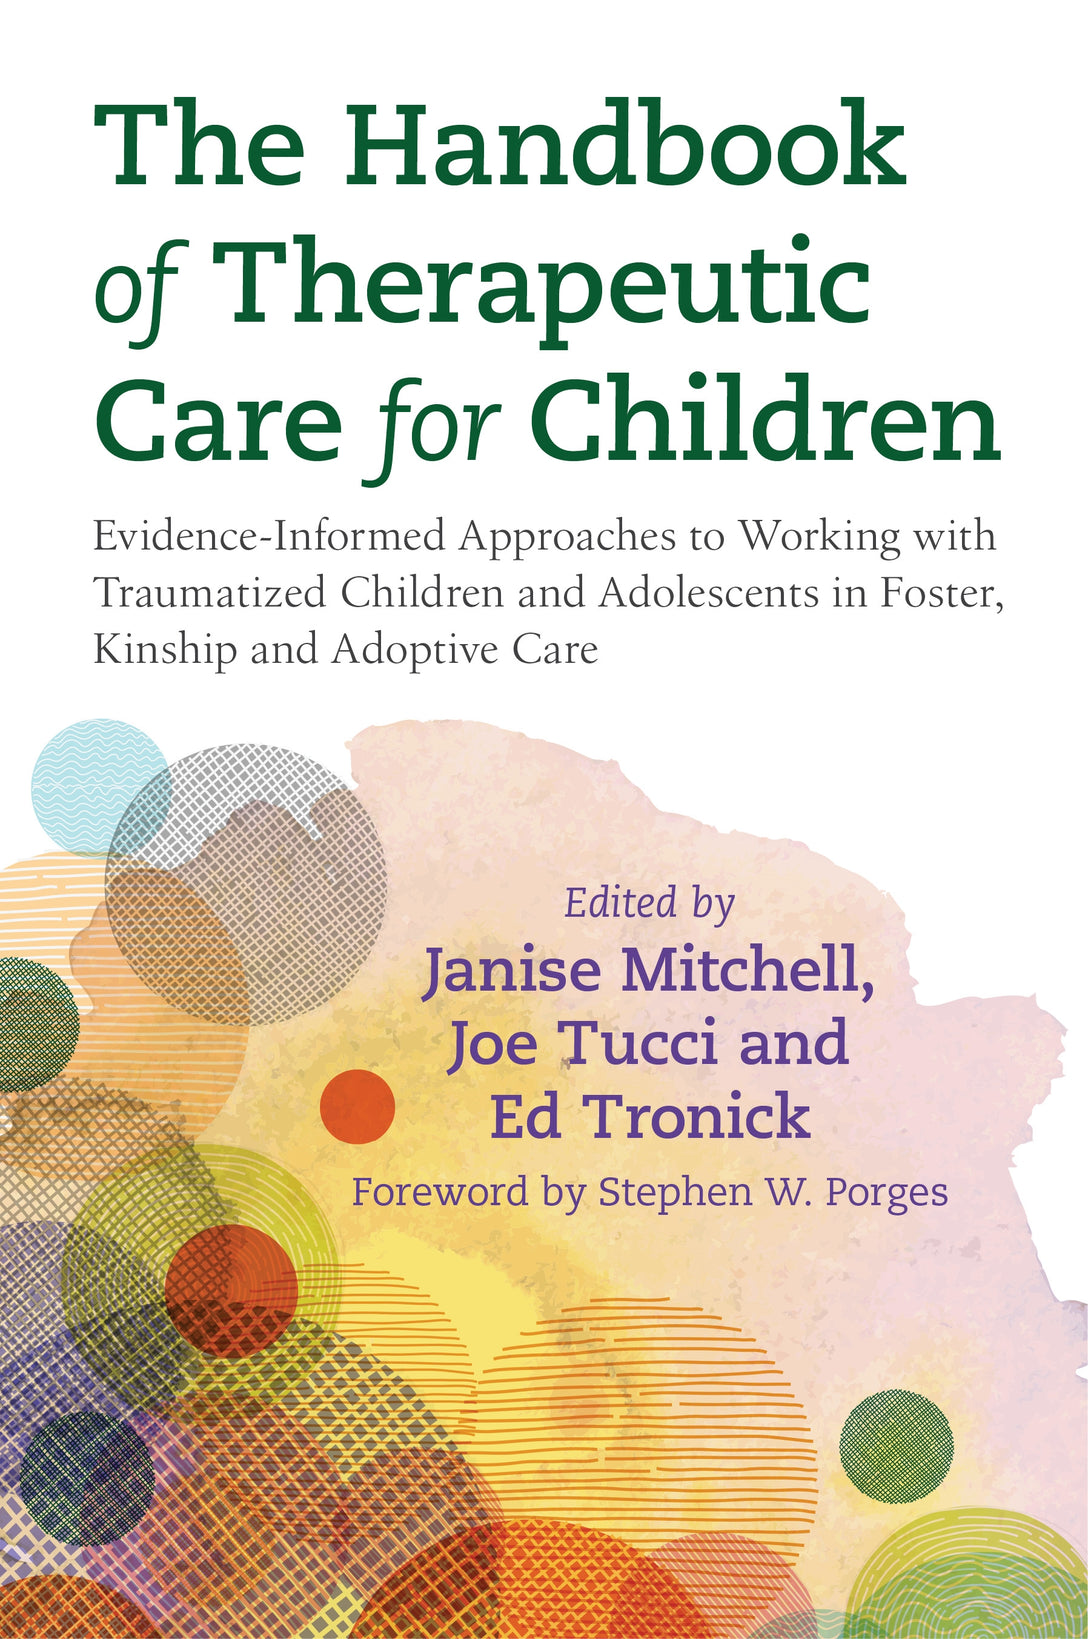 The Handbook of Therapeutic Care for Children by Joe Tucci, Janise Mitchell, Edward C Tronick, No Author Listed, Stephen W. Porges